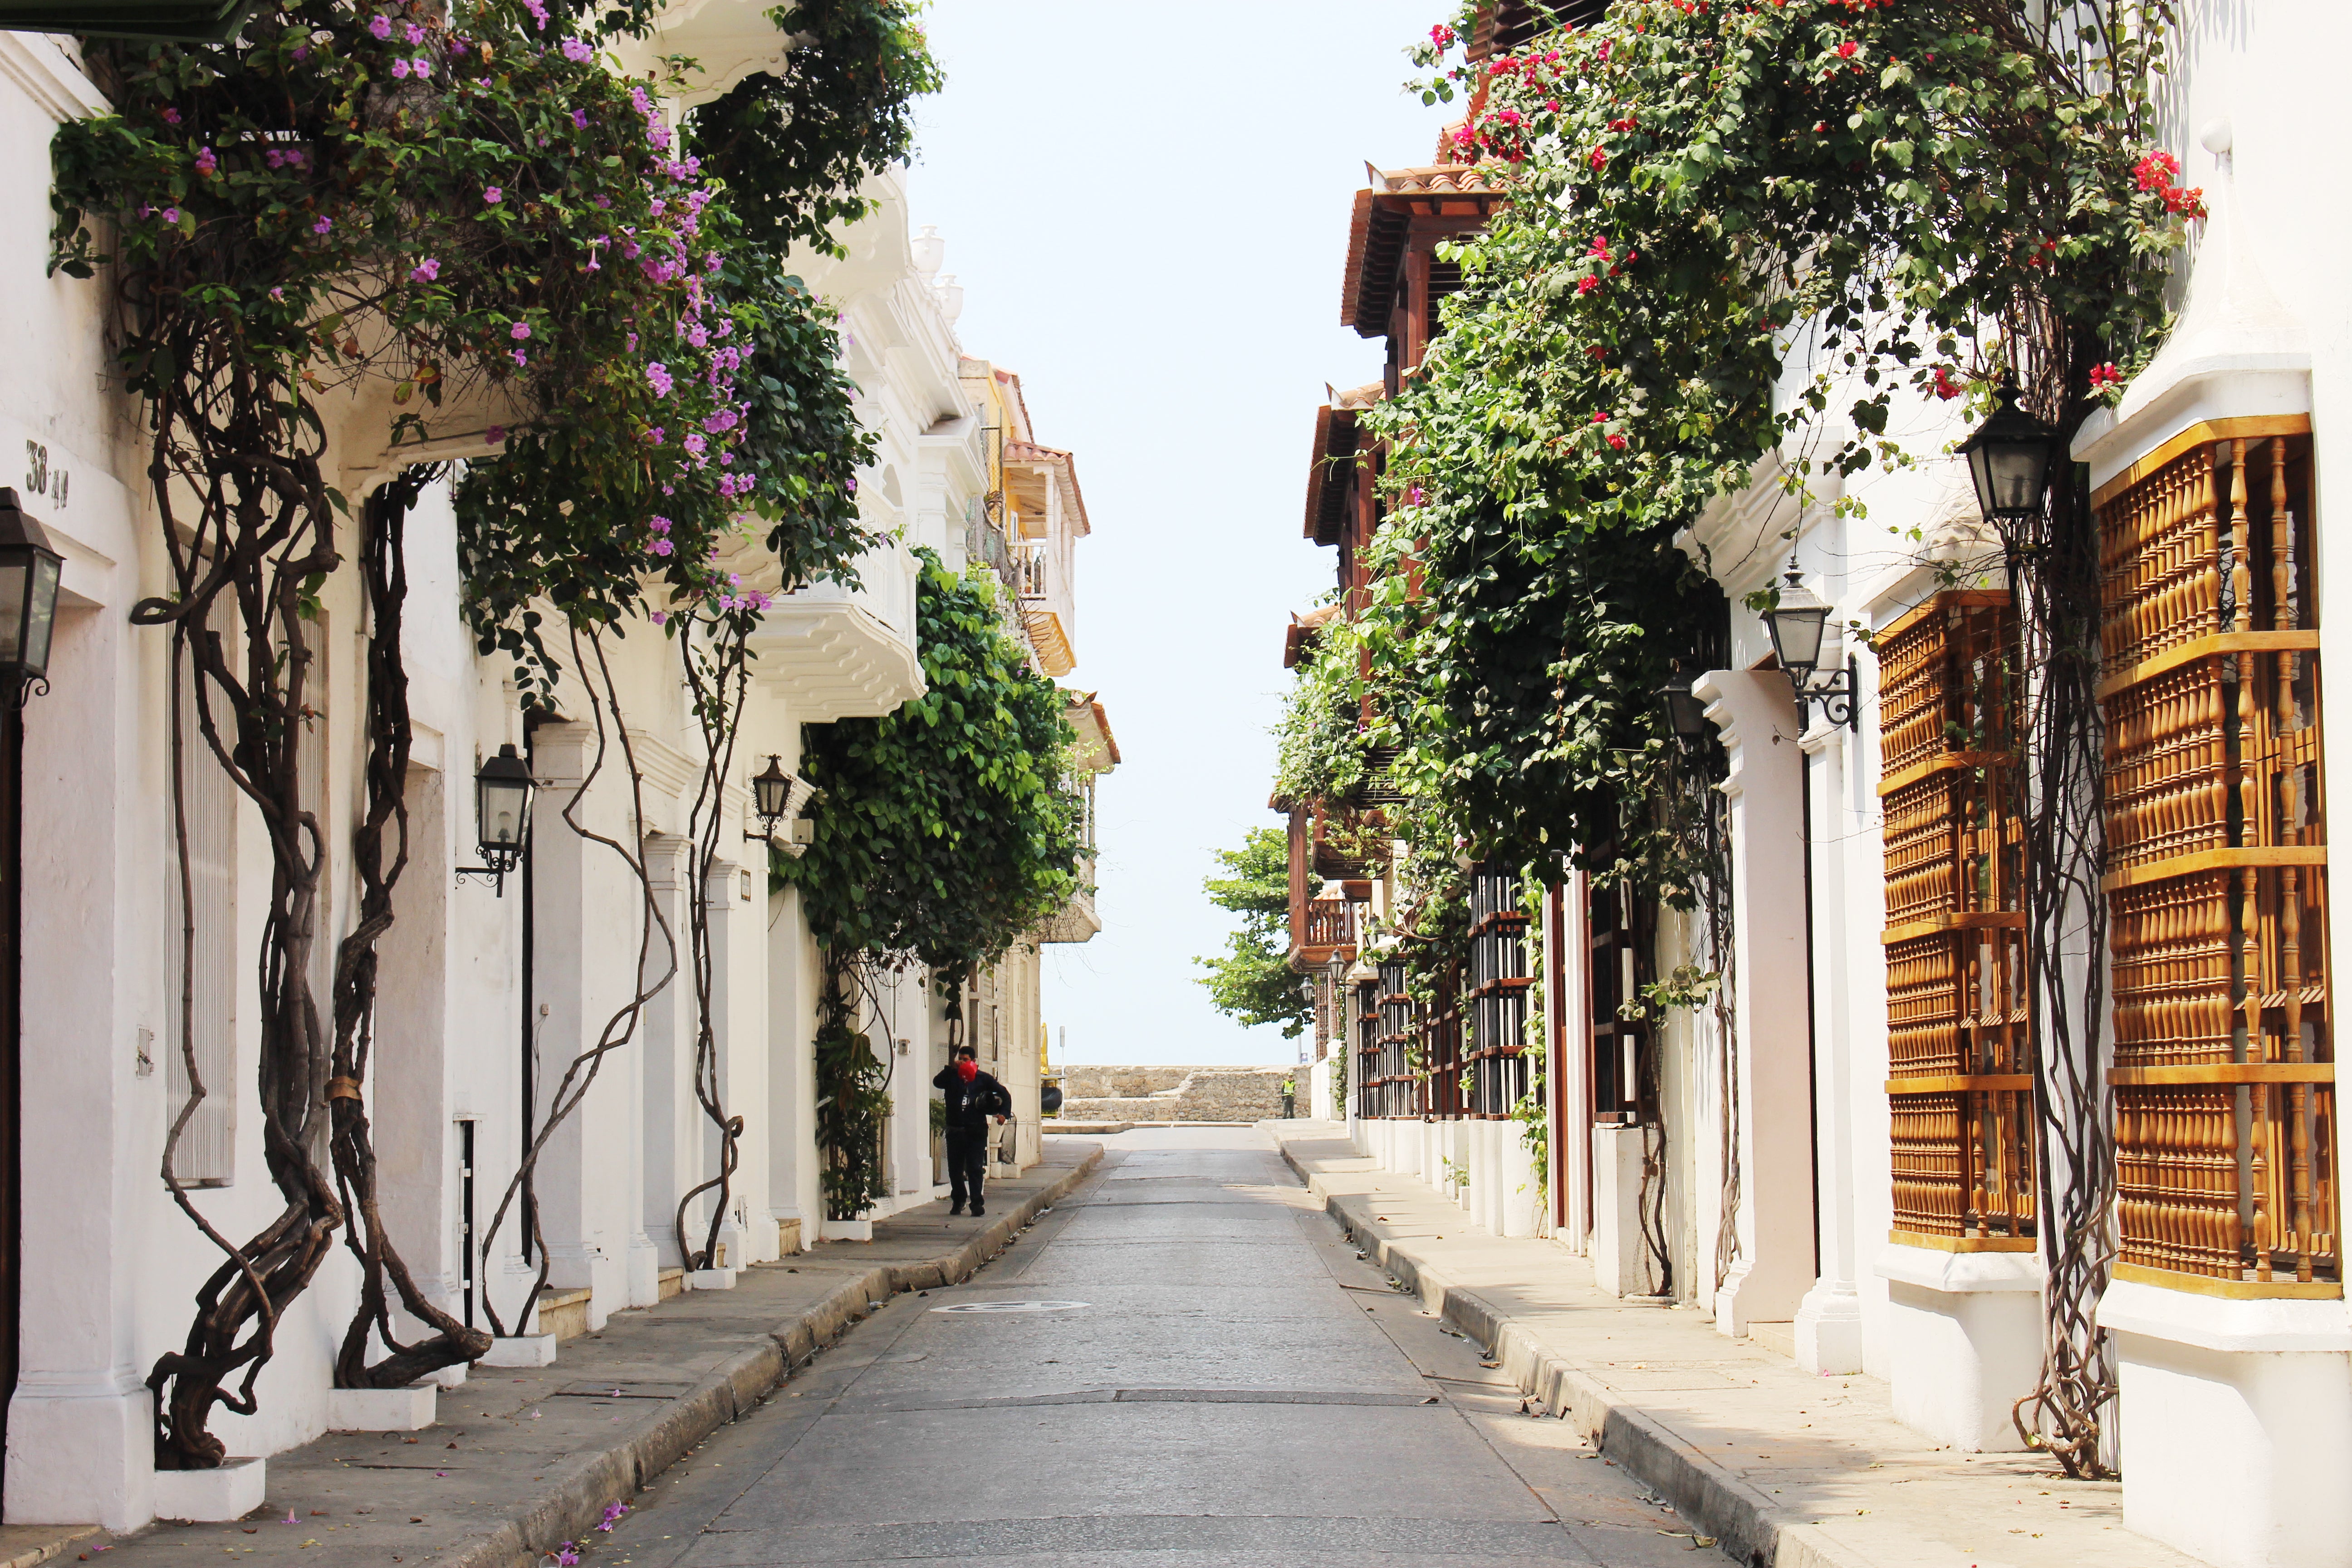 10 Reasons Why Your Next Trip Should Be: Cartagena Colombia